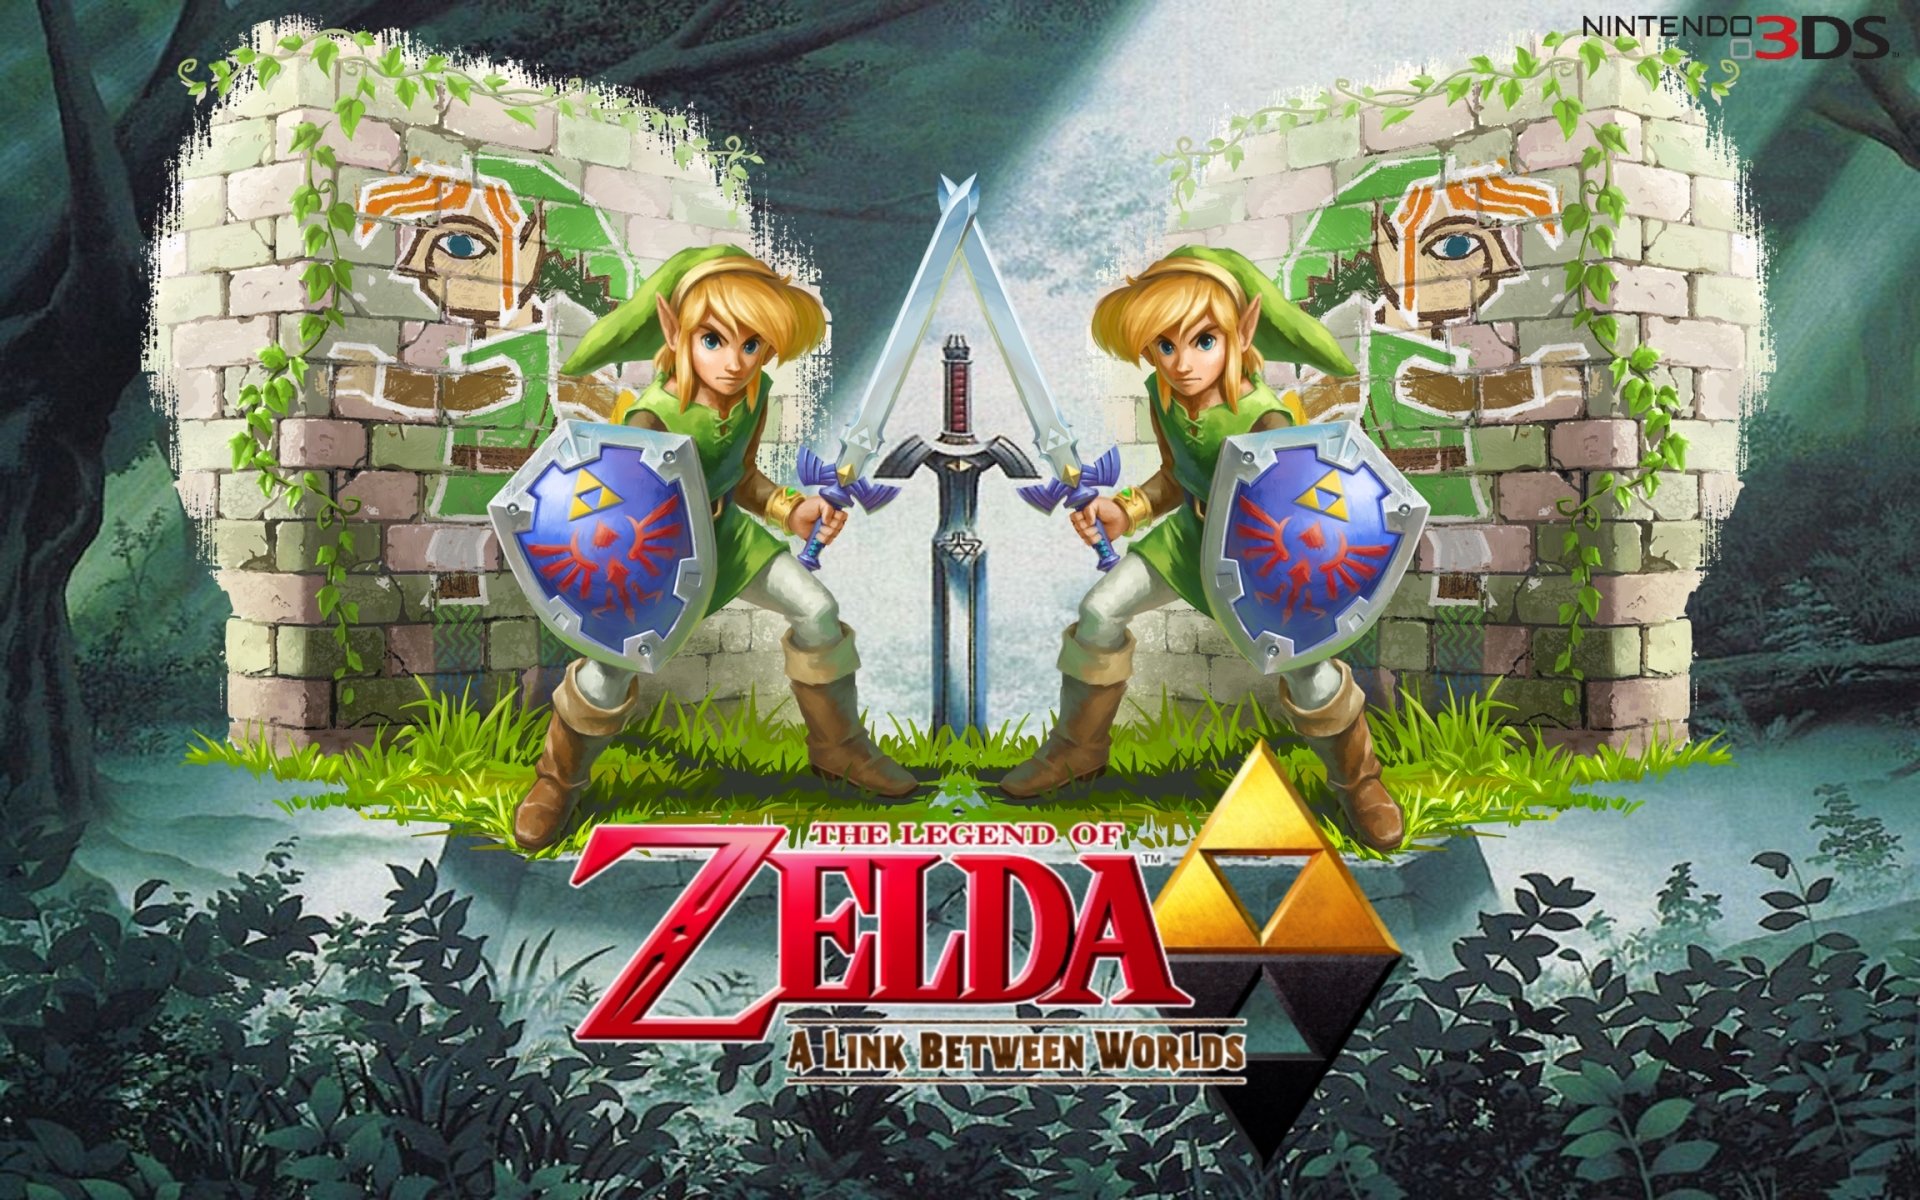 Download The Legend of Zelda: A Link Between Worlds 3DS ROM & CIA